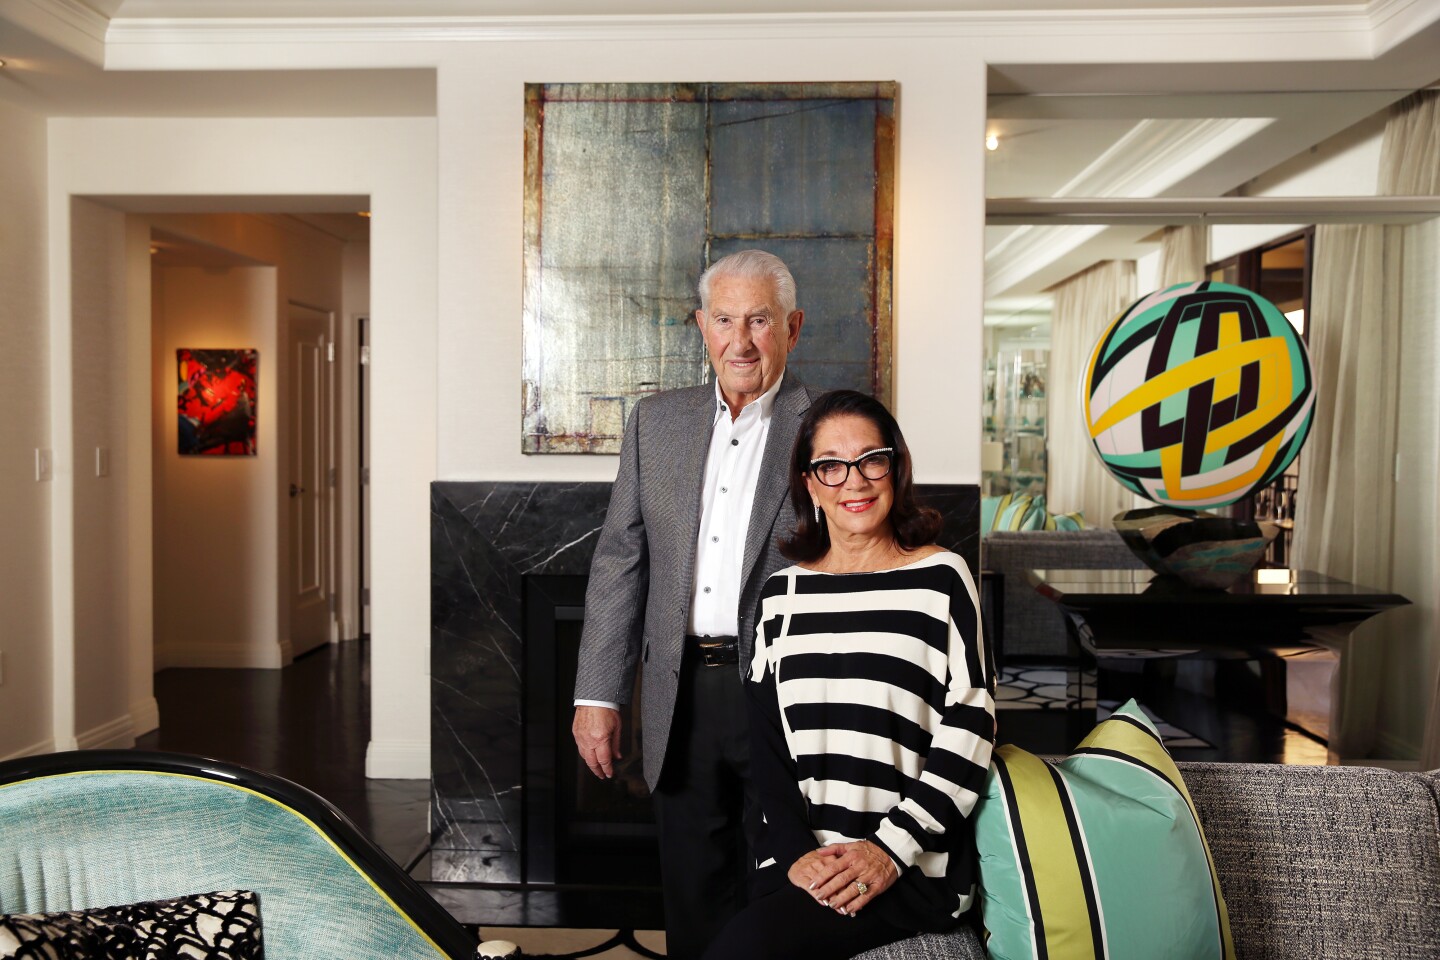 LOS ANGELES, CA-OCTOBER 15, 2019: Mort and Bobbi Topfer, left and right, pose for a portrait in their sixth floor apartment at the Montage Beverly Hills on October 9, 2019 in Los Angeles, California. The residence is the city's only five-star hotel residential property. (Photo By Dania Maxwell / Los Angeles Times)